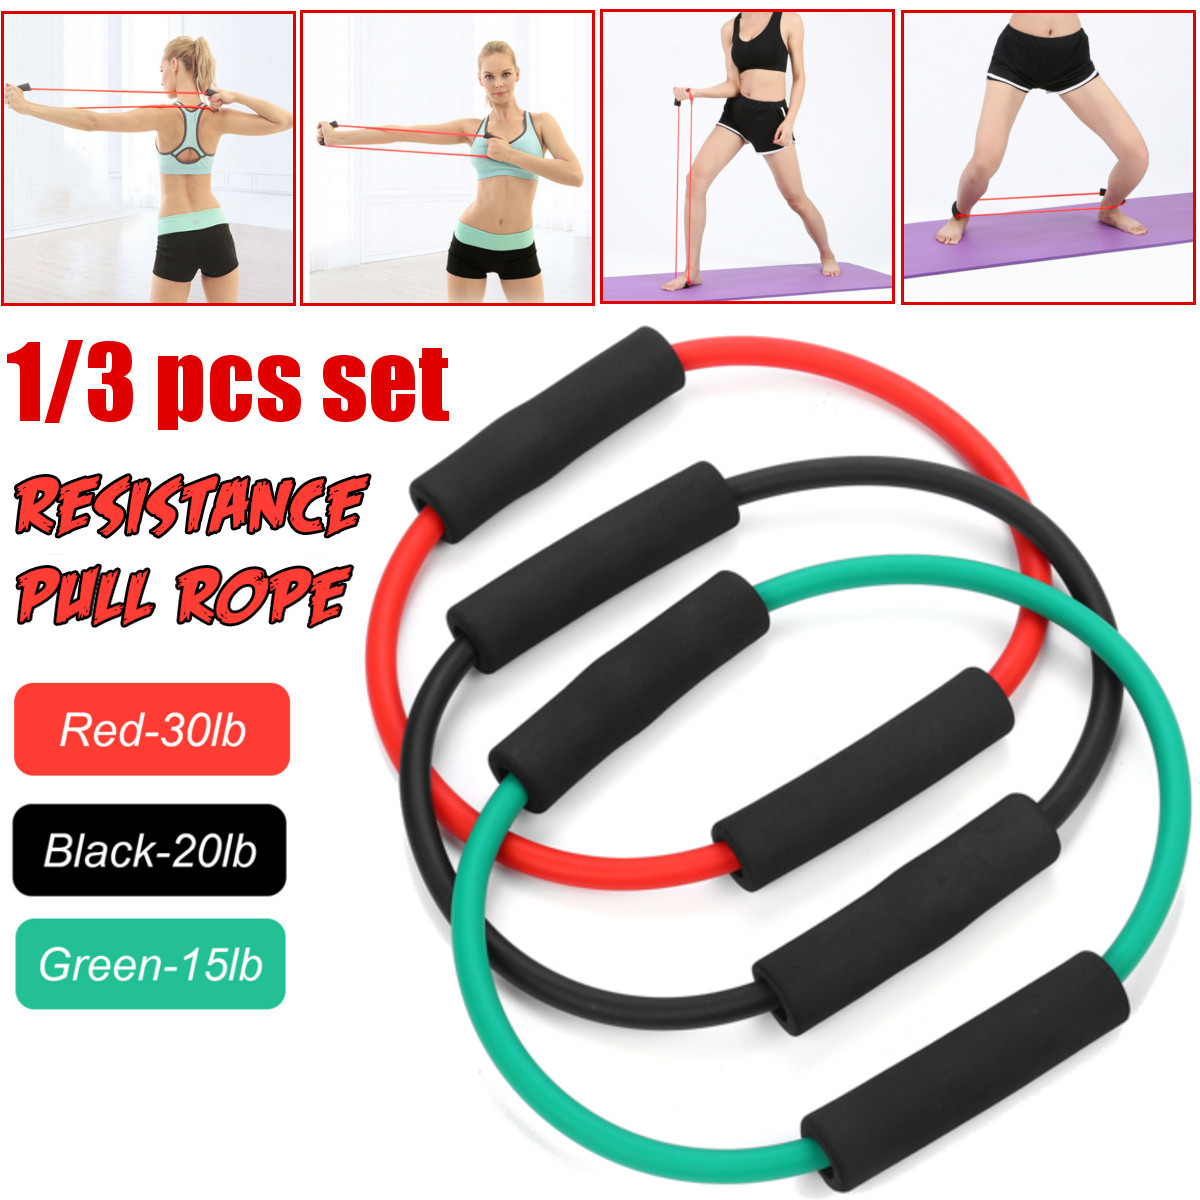 152030lb-Fitness-Resistance-Bands-Gym-Yoga-Pull-Rope-Gym-Exercise-Training-Workout-Tools-1684050-2